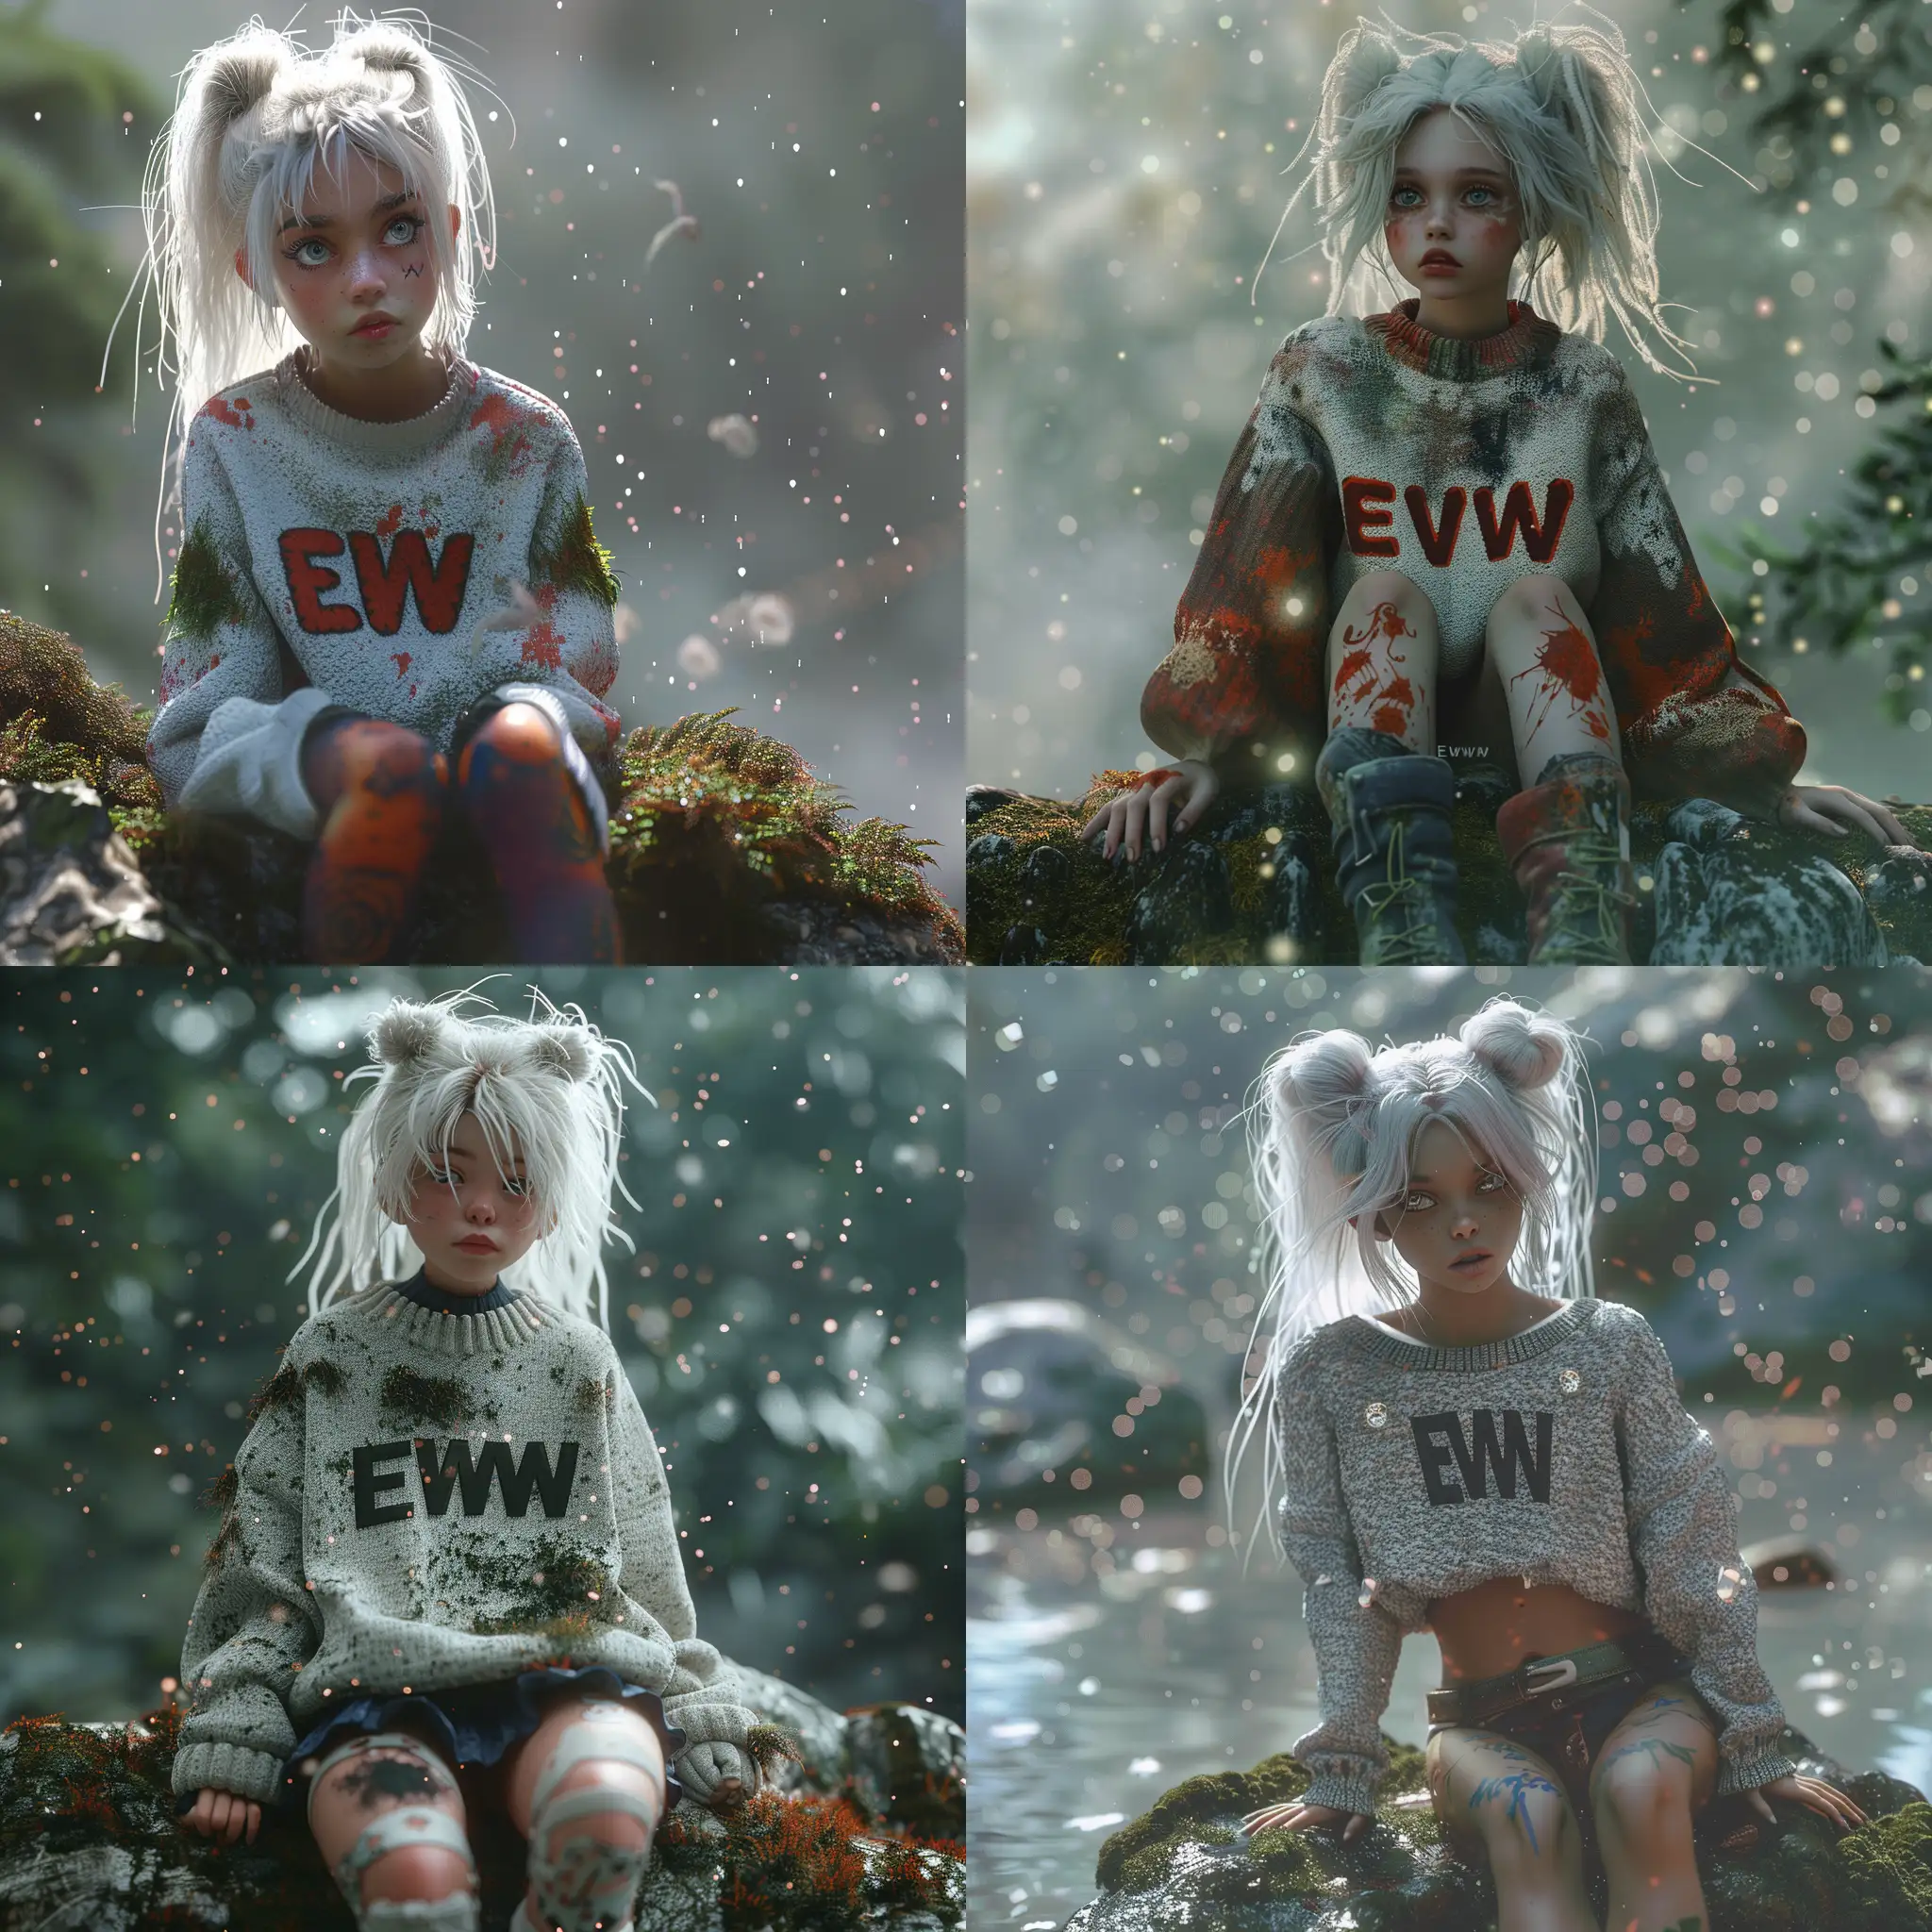 Surreal-Portrait-of-a-Stylish-Girl-with-White-Hair-on-MossCovered-Rock